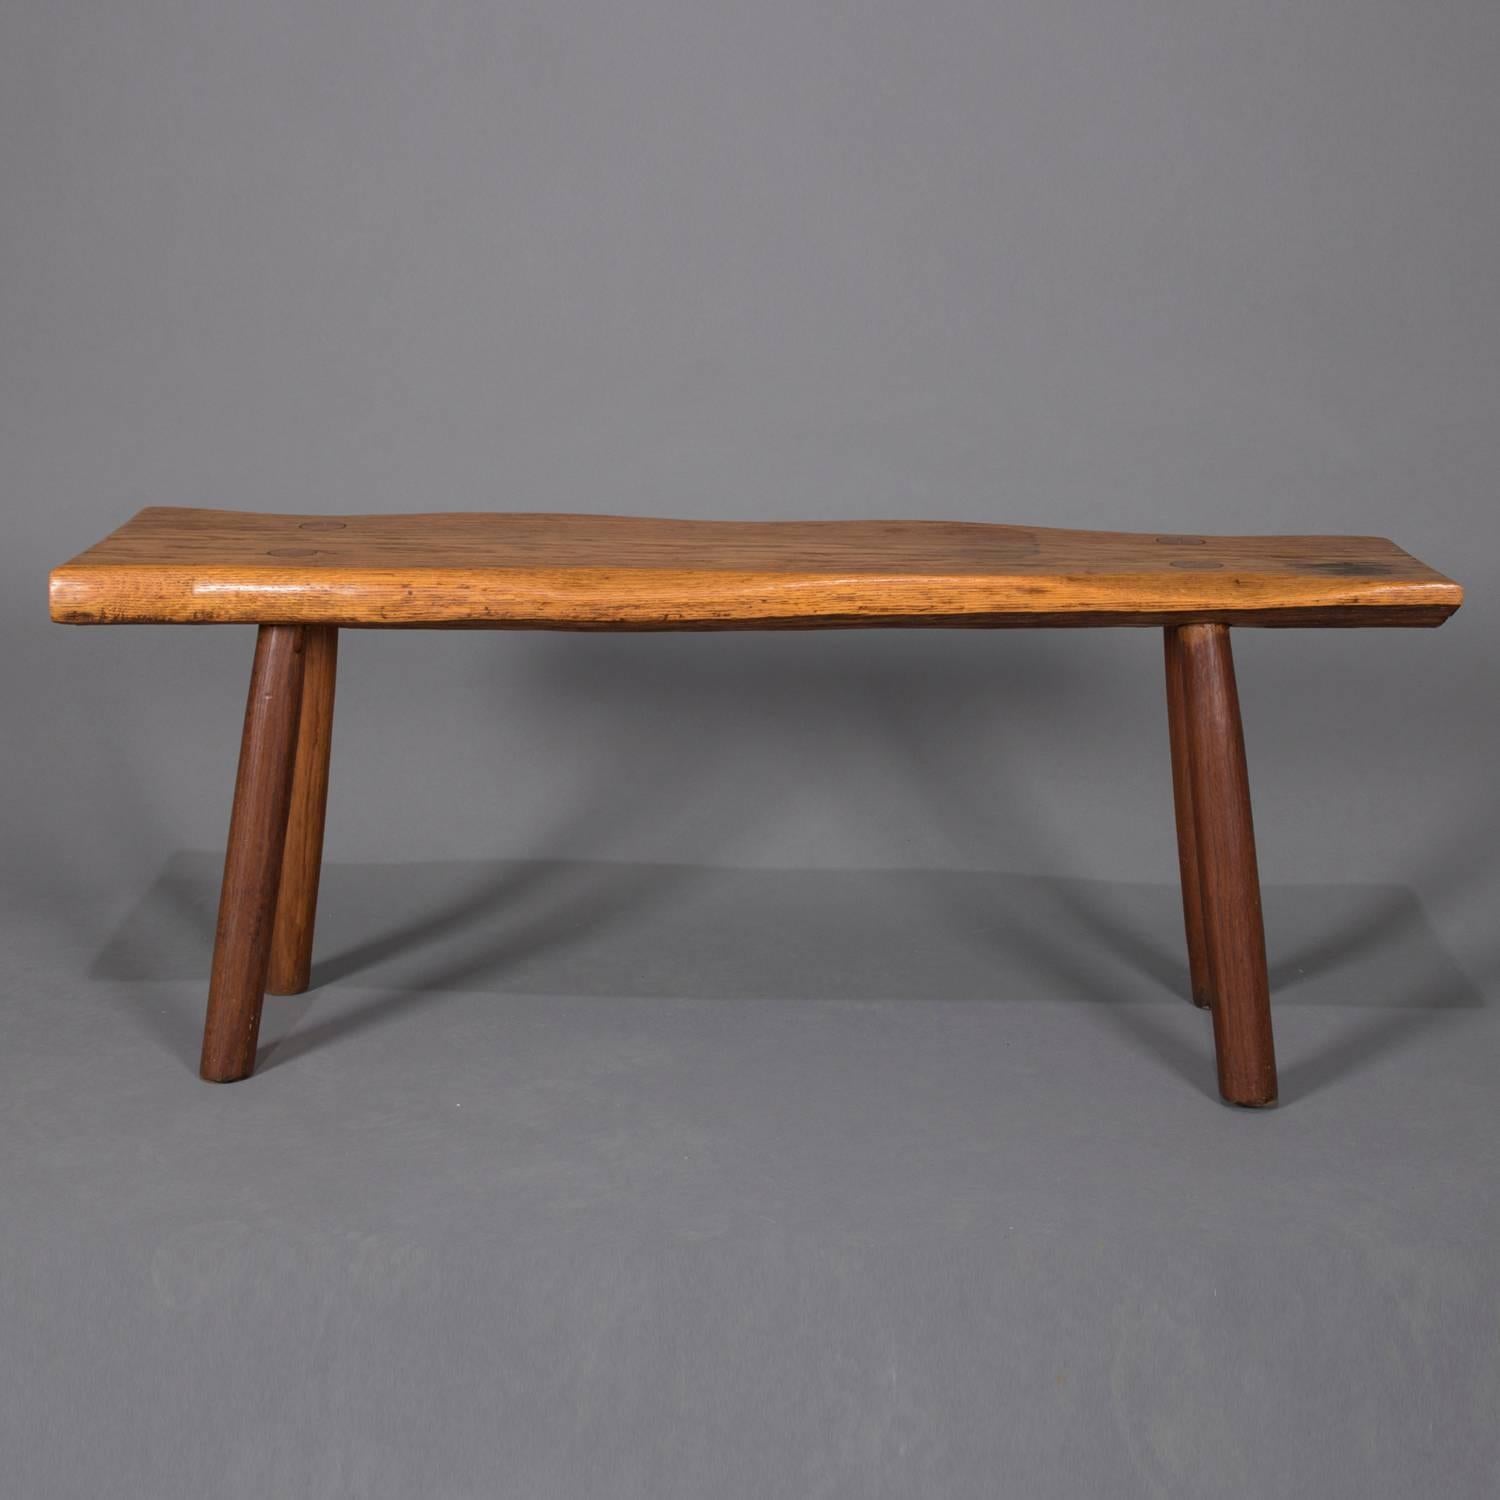 Adirondack Old hickory school hand-carved bench features slab wood seat with mortise and tenon legs, circa 1940.

Measures: 19.5